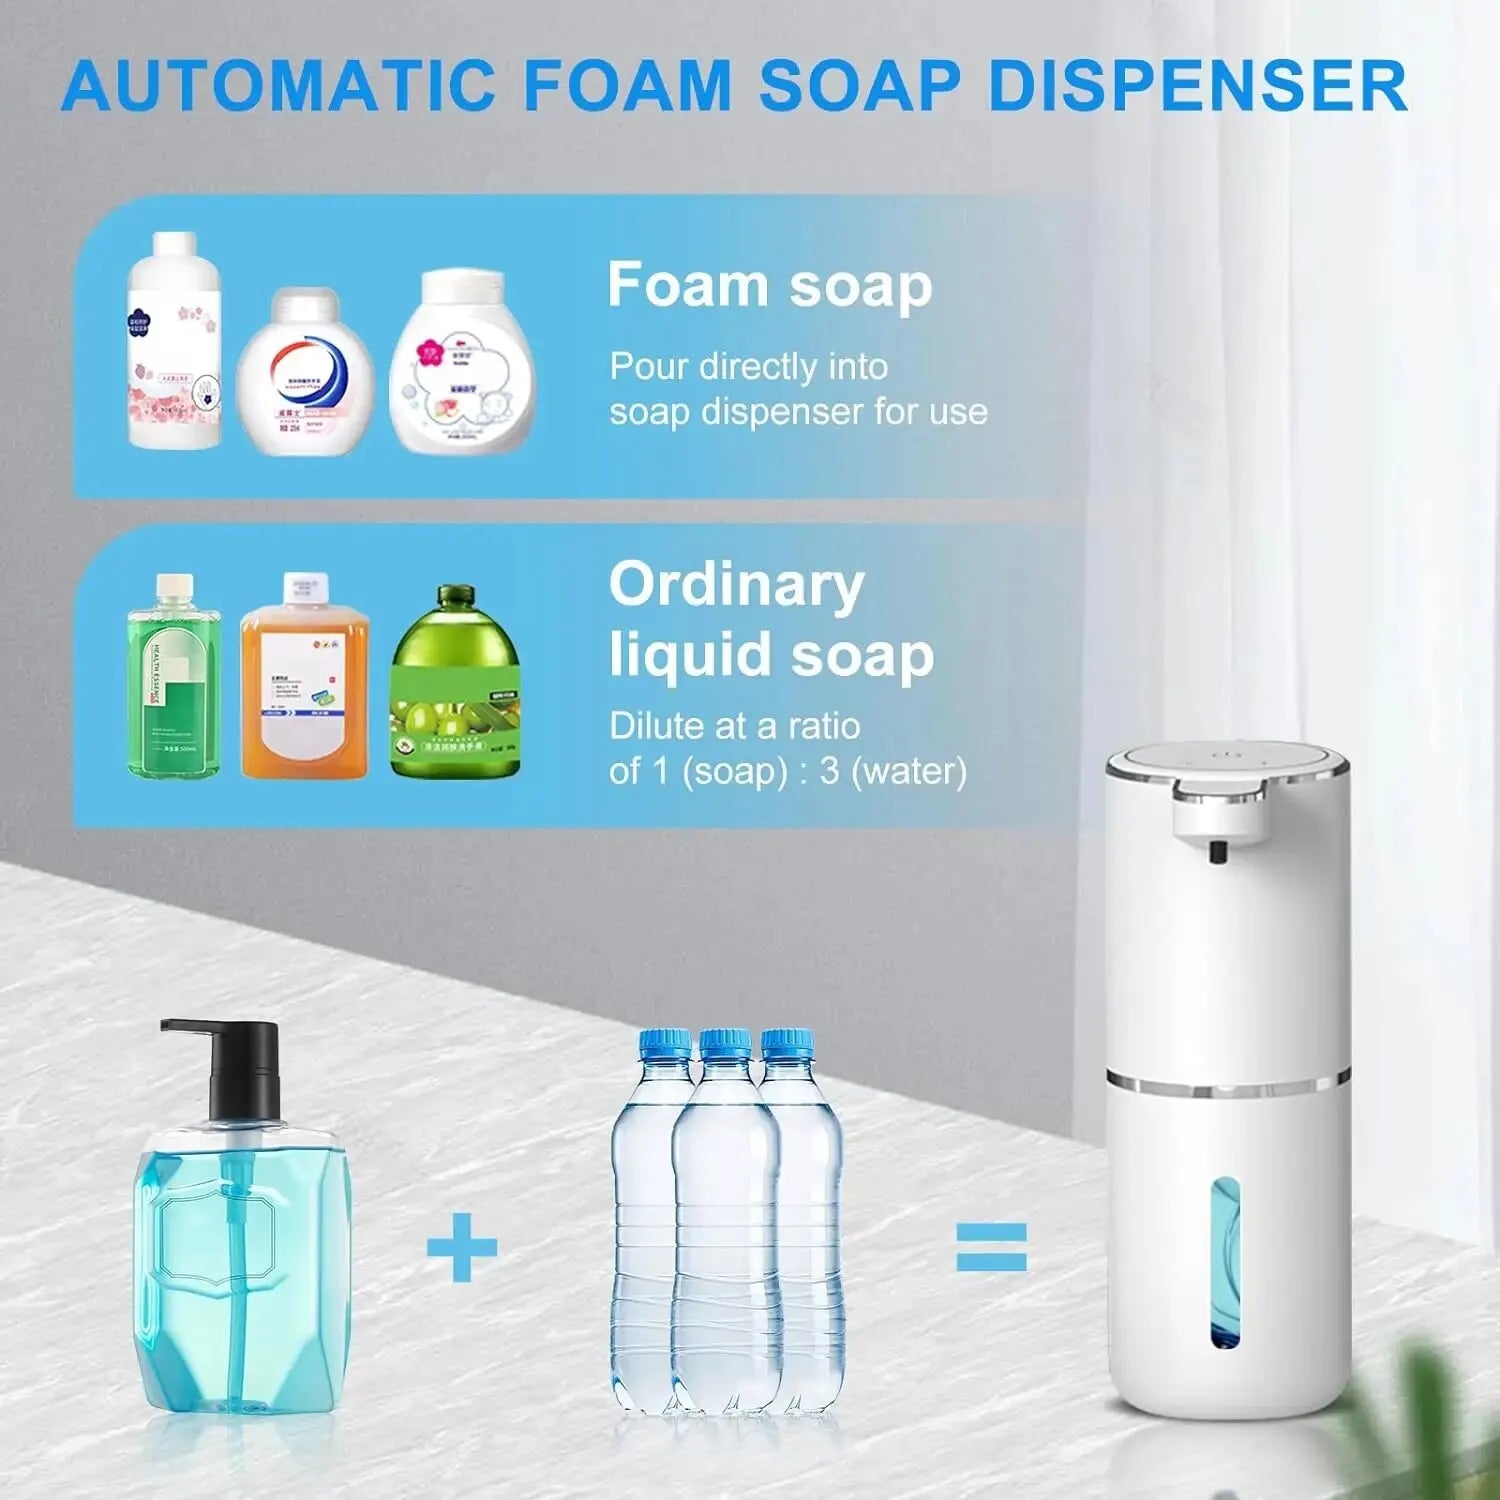 FoamBuddy - Touchless Hands-Free Soap Dispenser: Hygienic, Rechargeable, and Portable